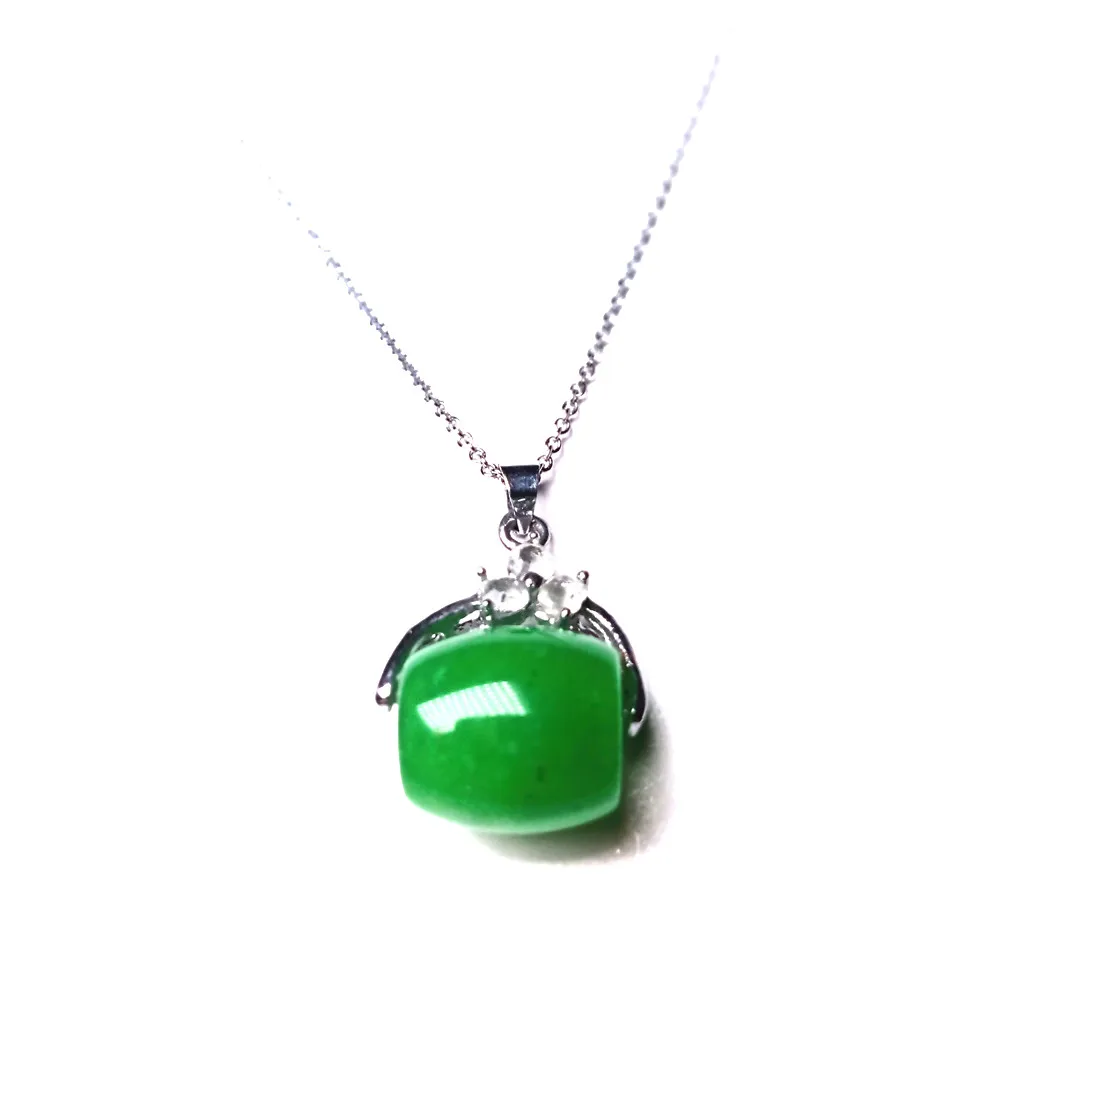 new NATURAL 8mm GREEN JADE ROUND BEADS & TEARDROP PENDANTS NECKLACE 18"